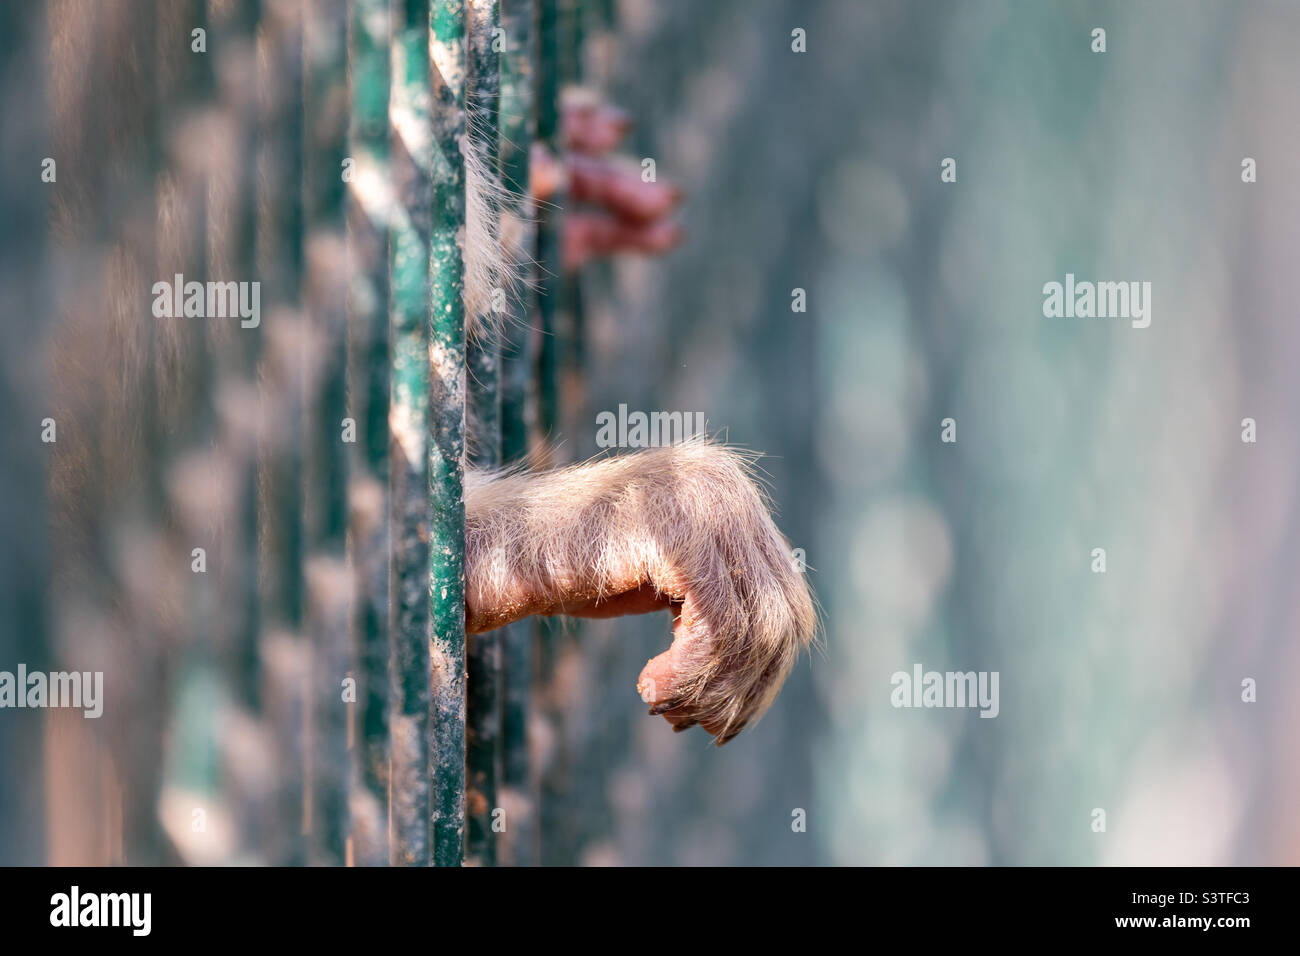 Hand of a monkey out from the cage, sad story Stock Photo